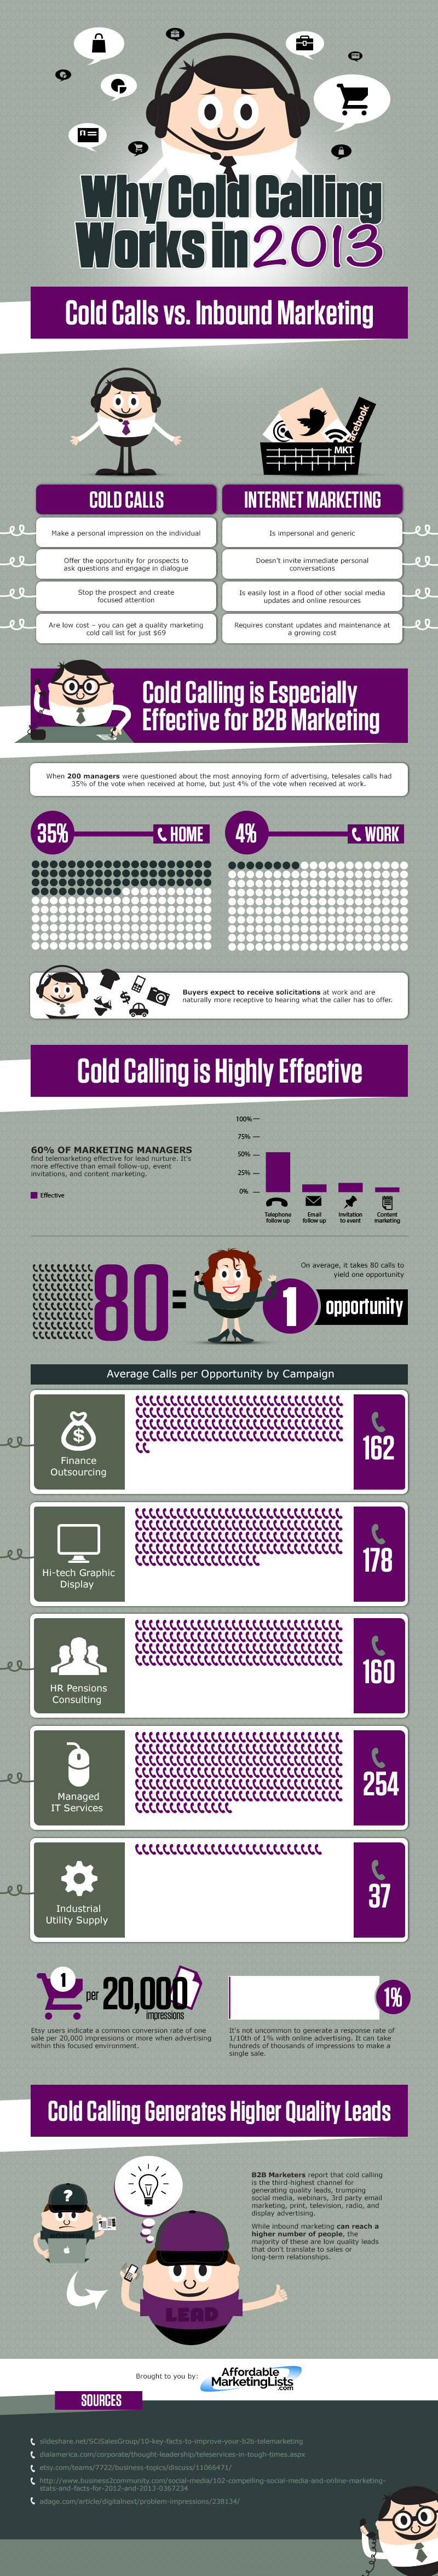 Why Cold Calling Works In 2013